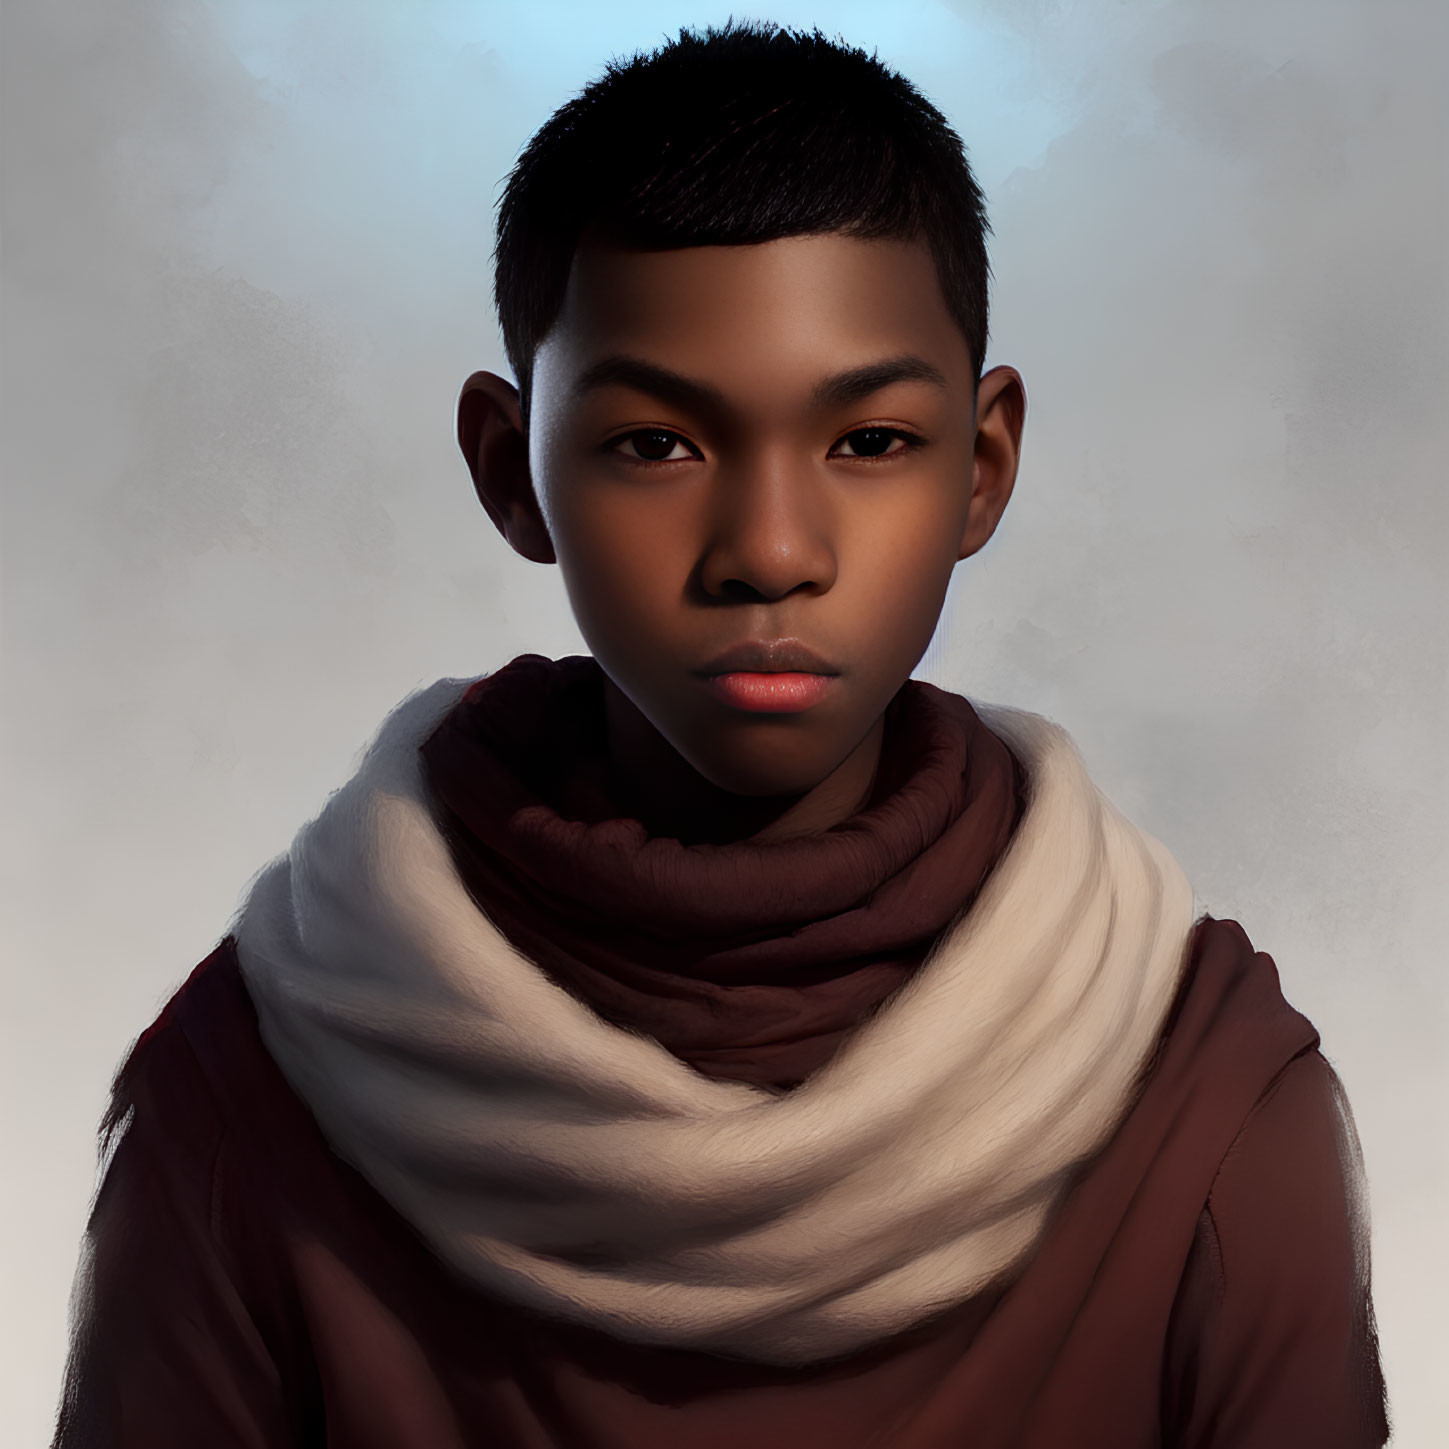 Young boy with short hair in brown shirt and white scarf portrait.